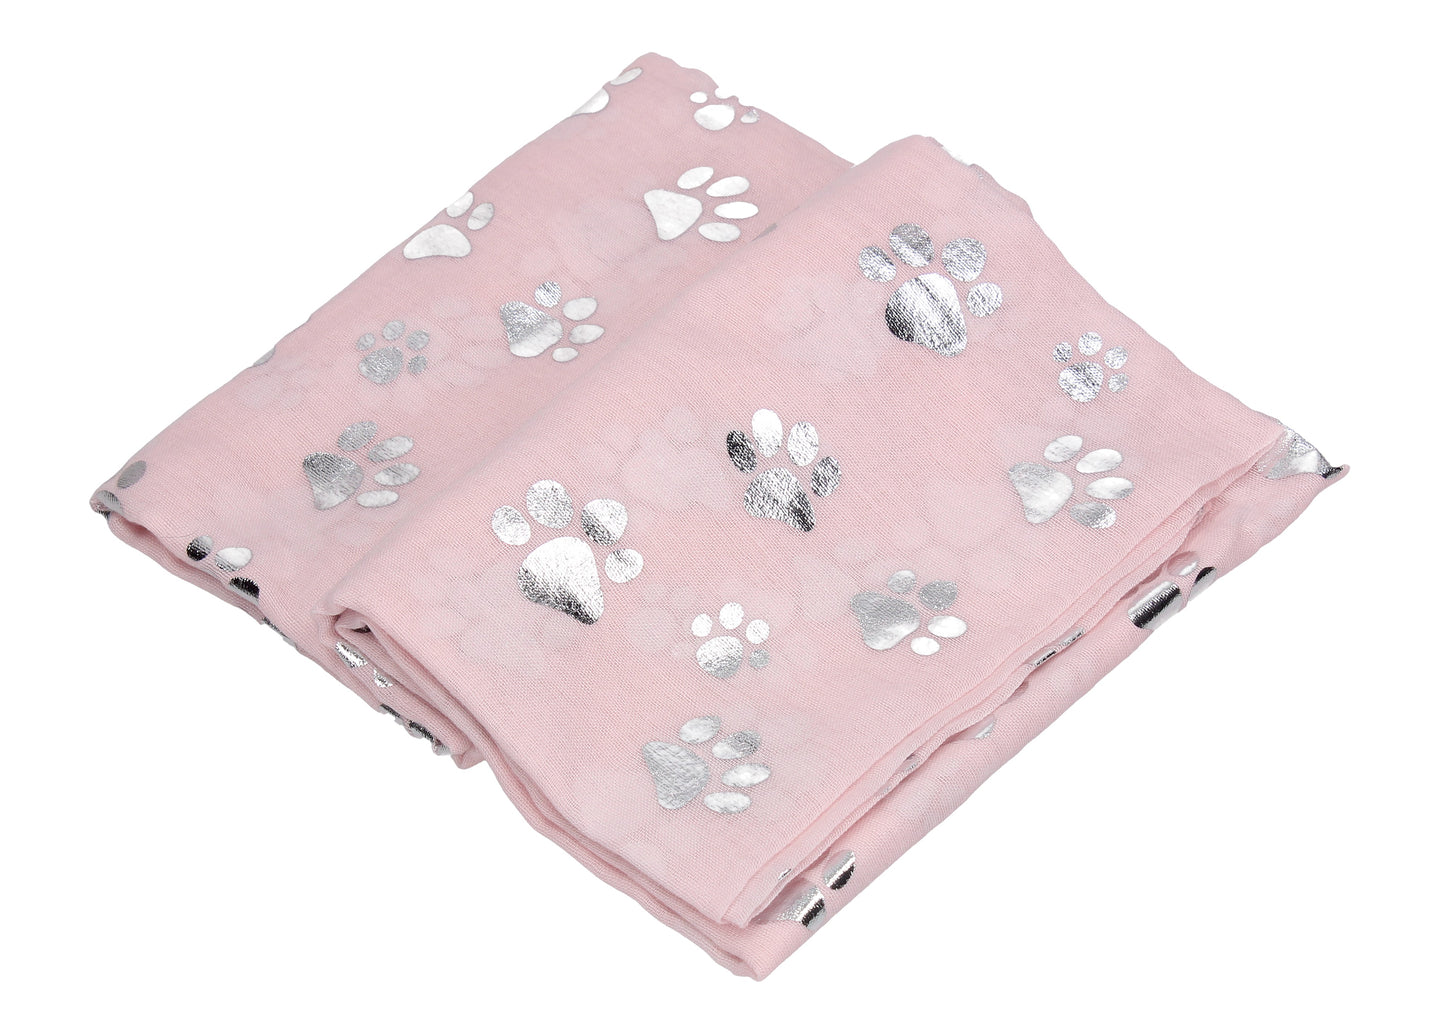 Holly Silver Foil Paw Print Puppy Dog Scarf Pink